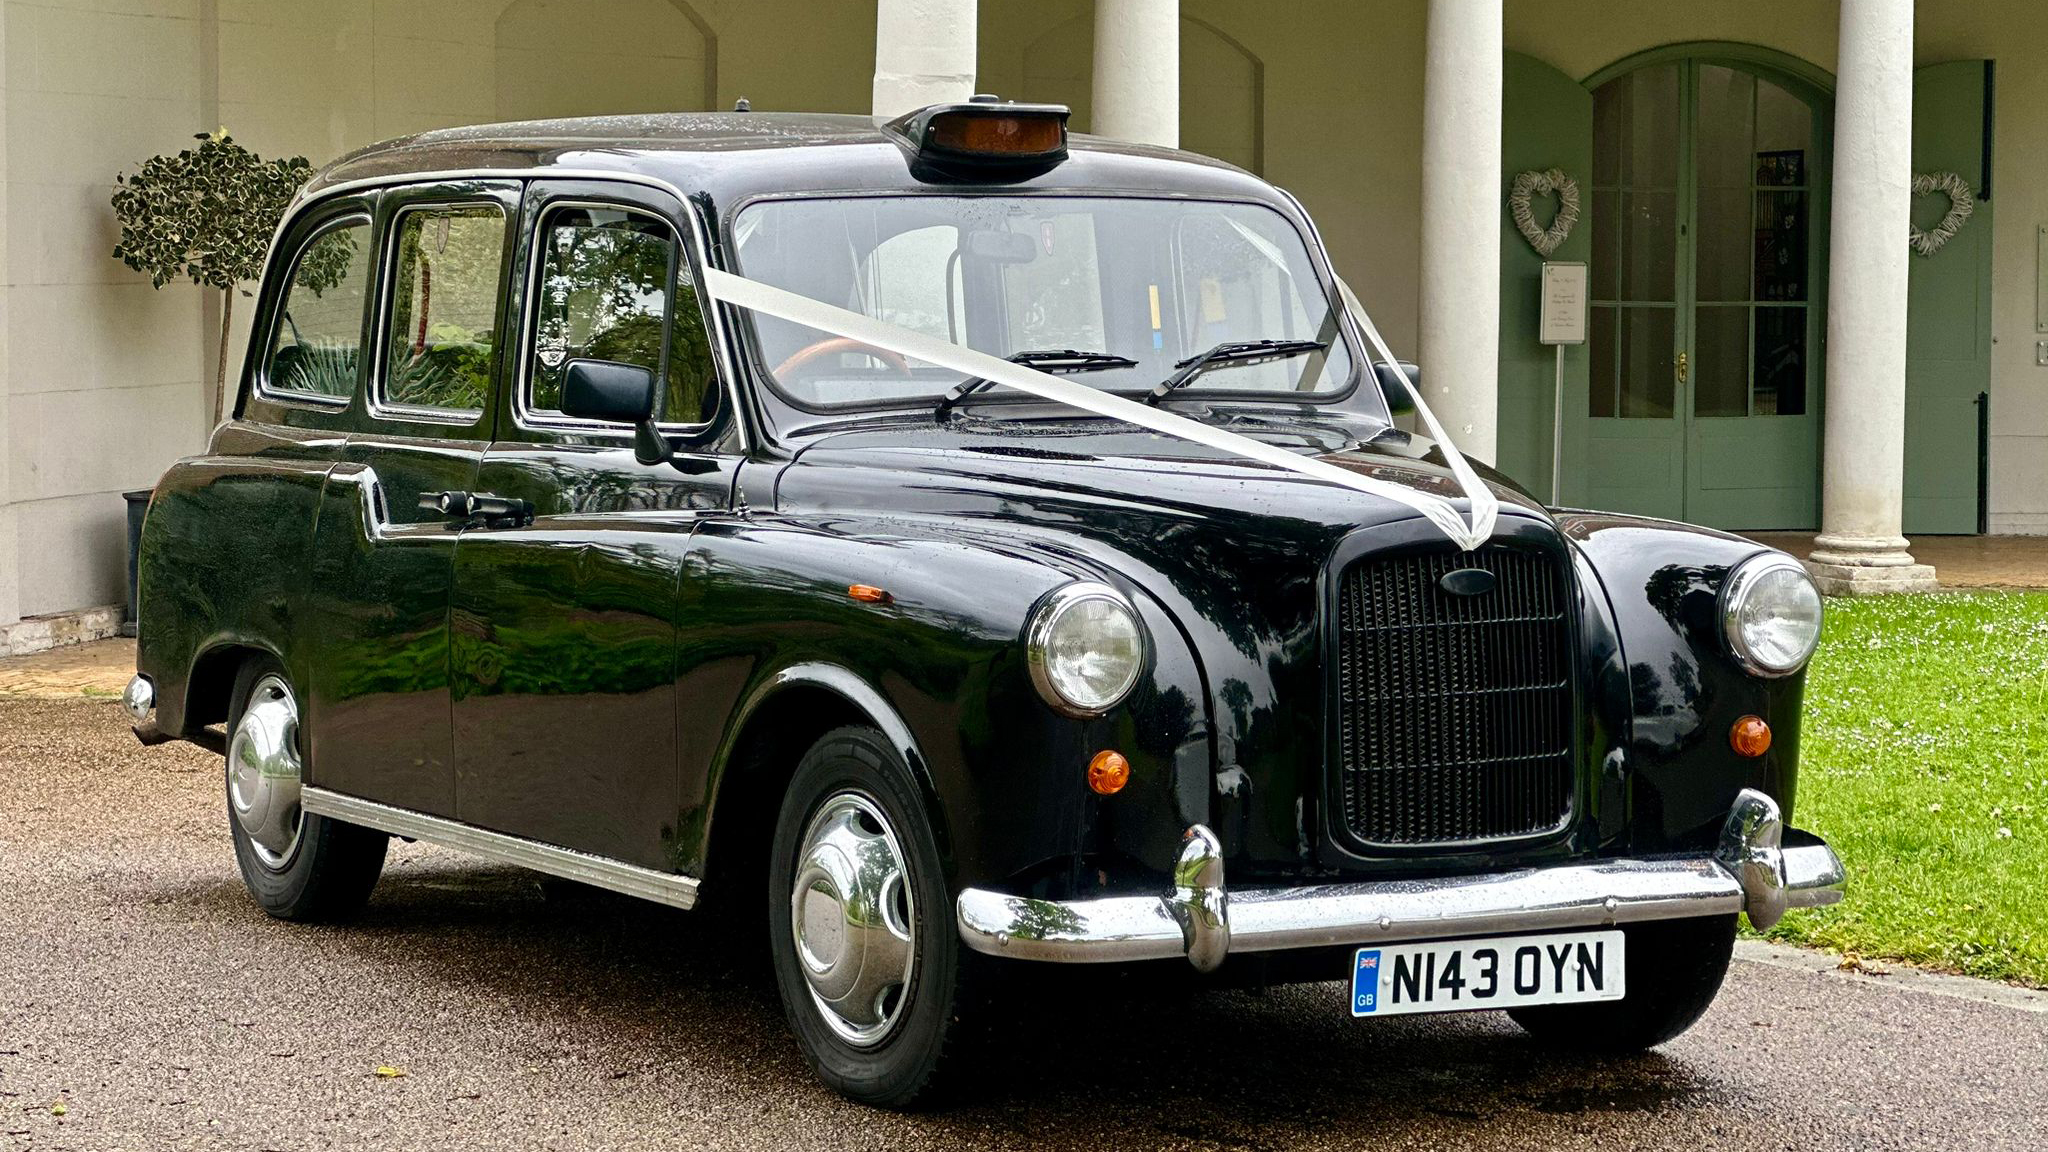 Front Side view of Classic Black Taxi Cab decorated with ivory wedding ribbons